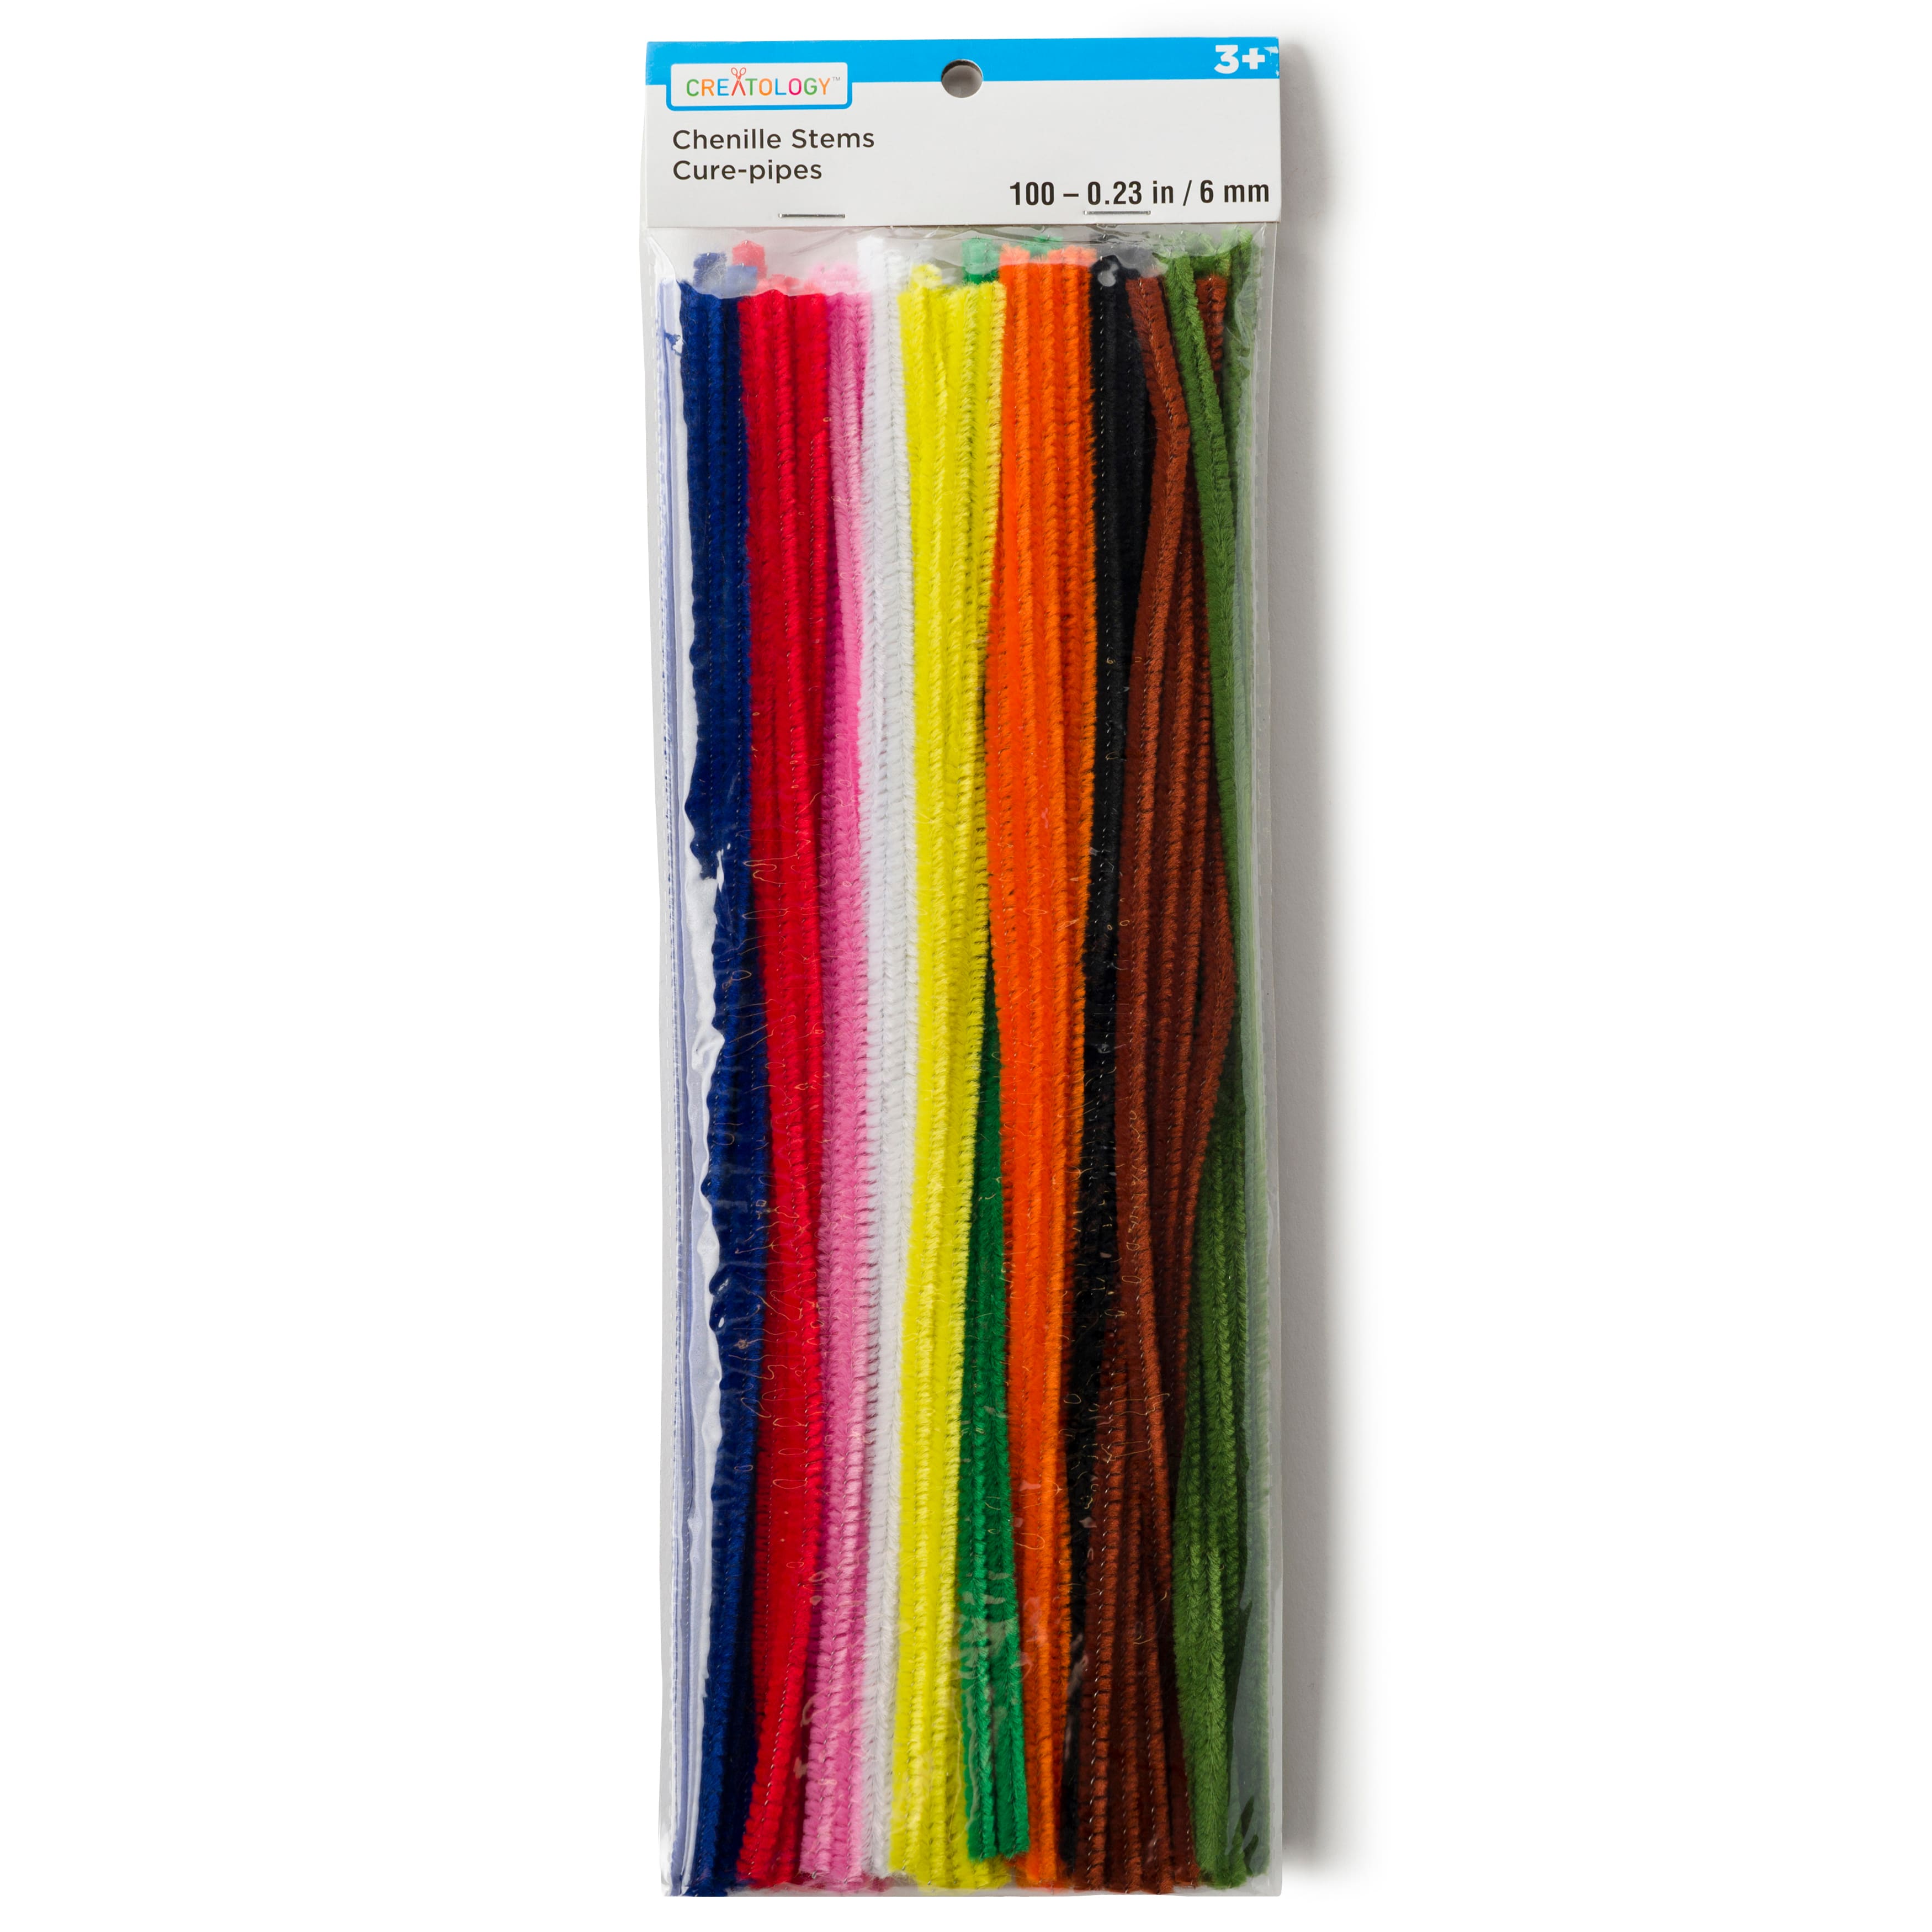 FUZZY PIPE CLEANER STEMS Chenille Craft Stems Creative Arts Chenille Stem  Chenille Stems Pipe Cleaners 12 30cm Random Color From Angelcheng2013,  $13.07